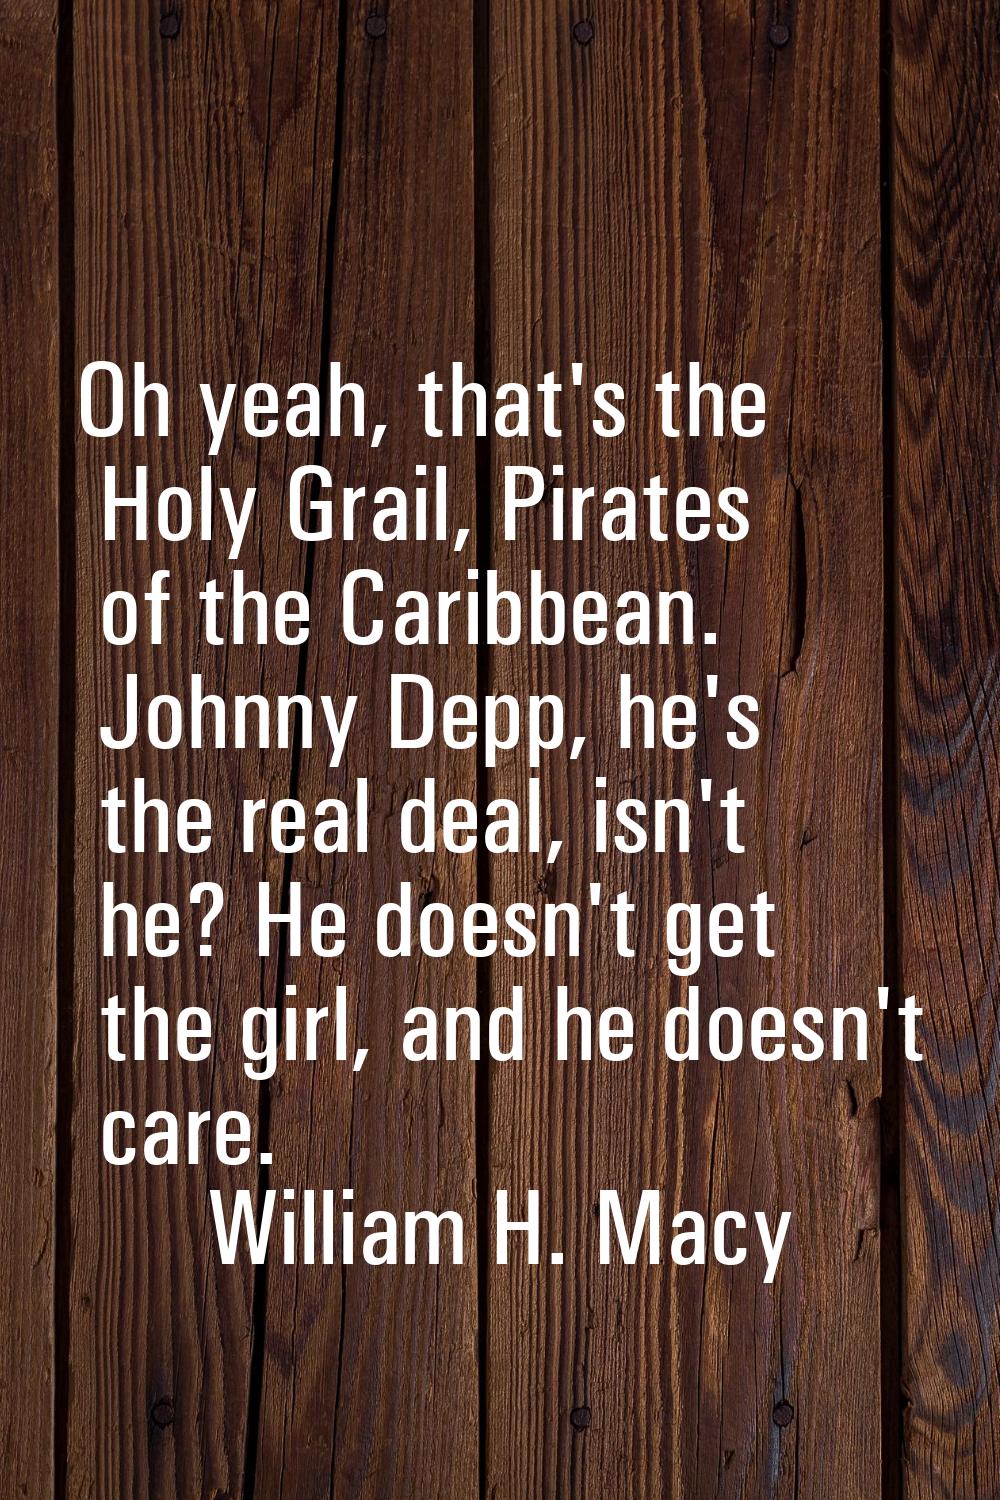 Oh yeah, that's the Holy Grail, Pirates of the Caribbean. Johnny Depp, he's the real deal, isn't he